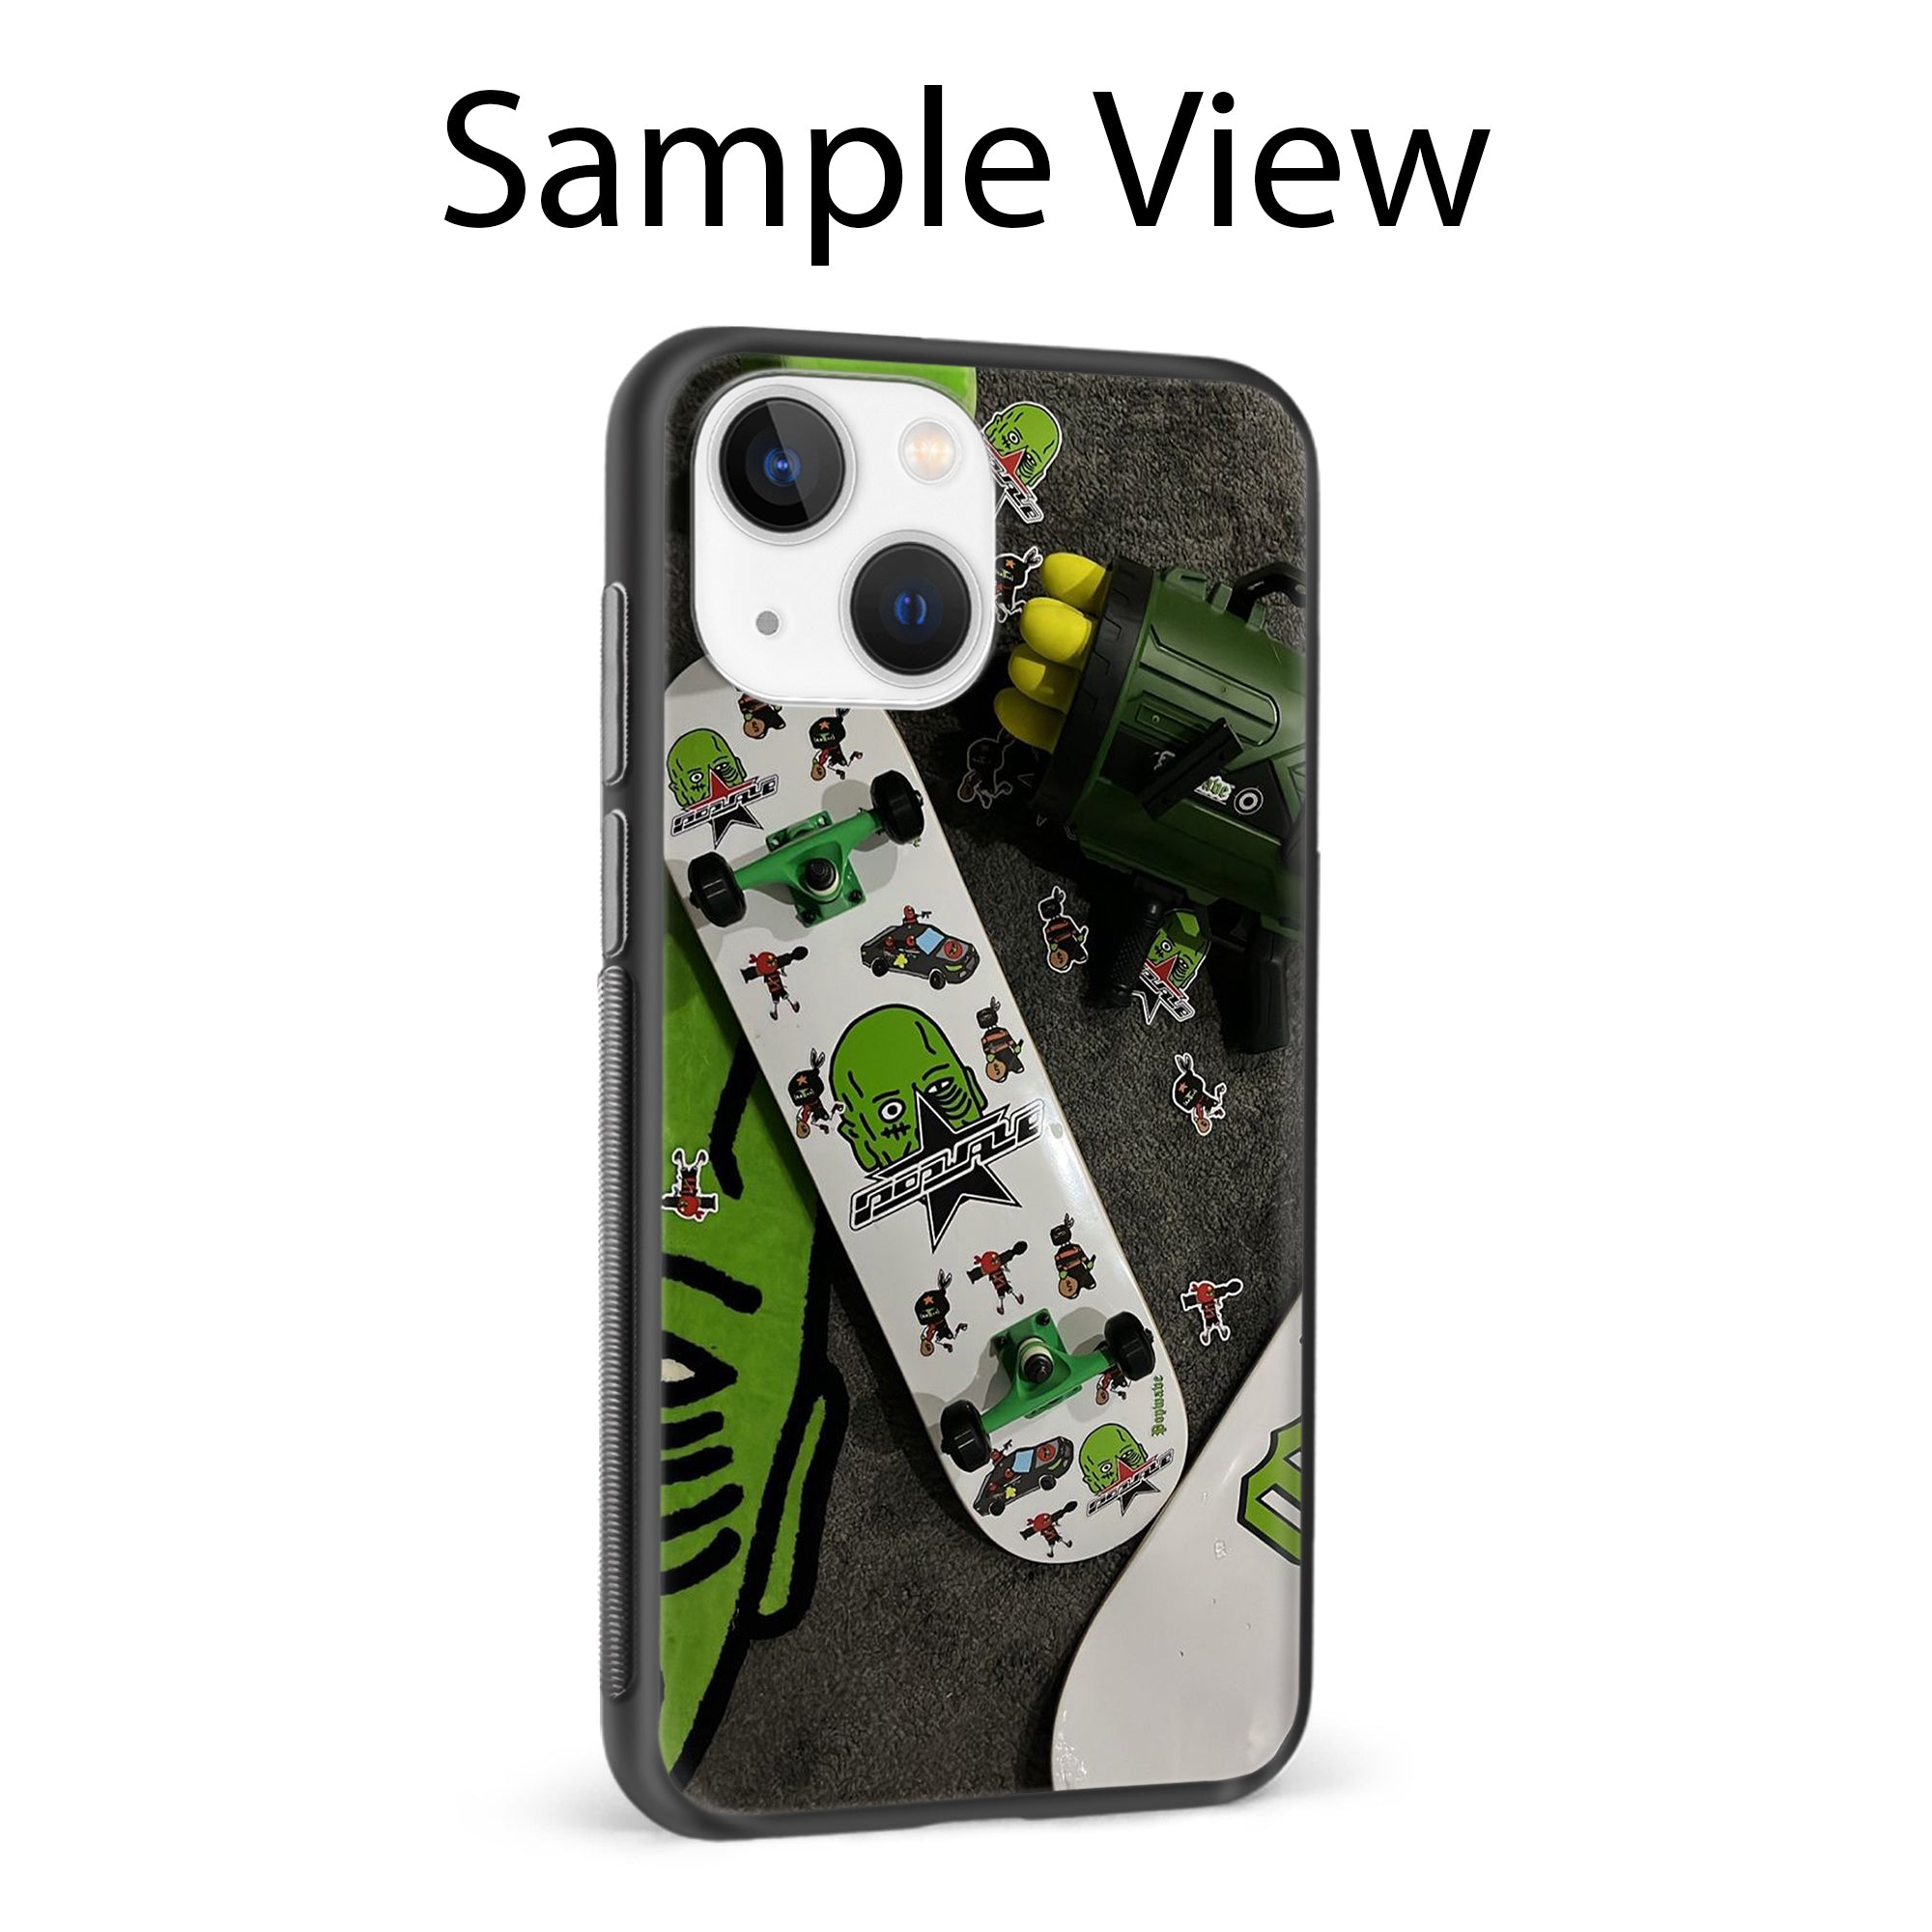 Buy Hulk Skateboard Metal-Silicon Back Mobile Phone Case/Cover For Samsung Galaxy M31 Online